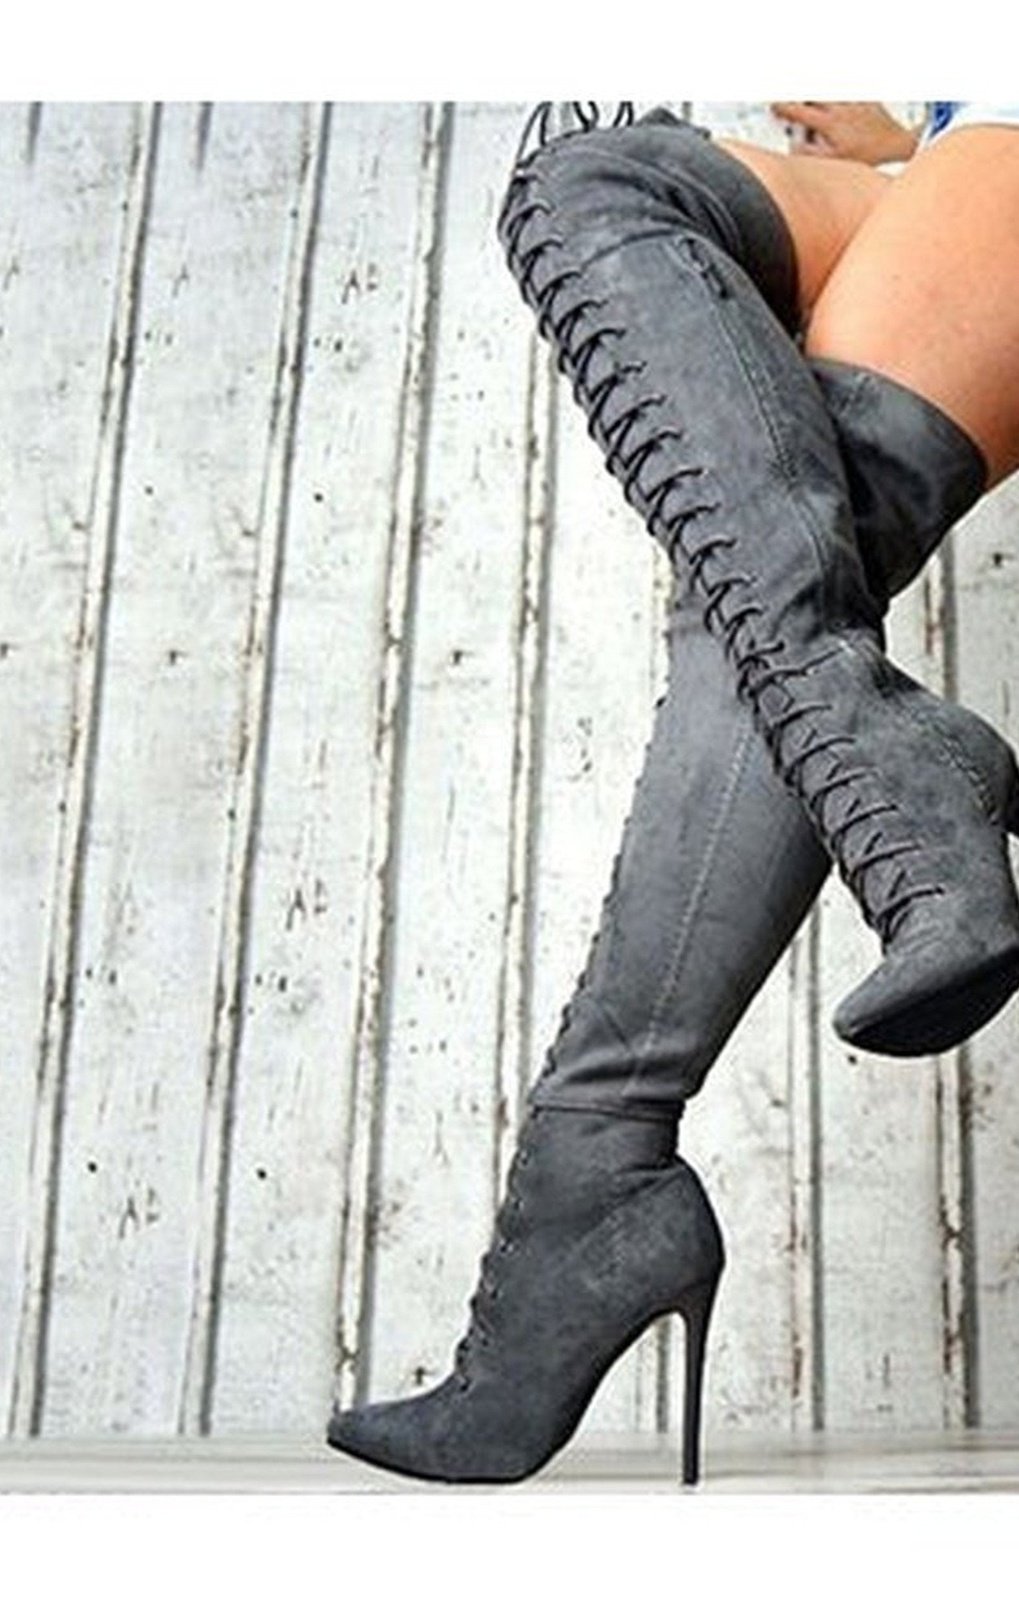 Thigh High Lace Front High Stiletto Heel Boots with Zipper (4 COLORS)